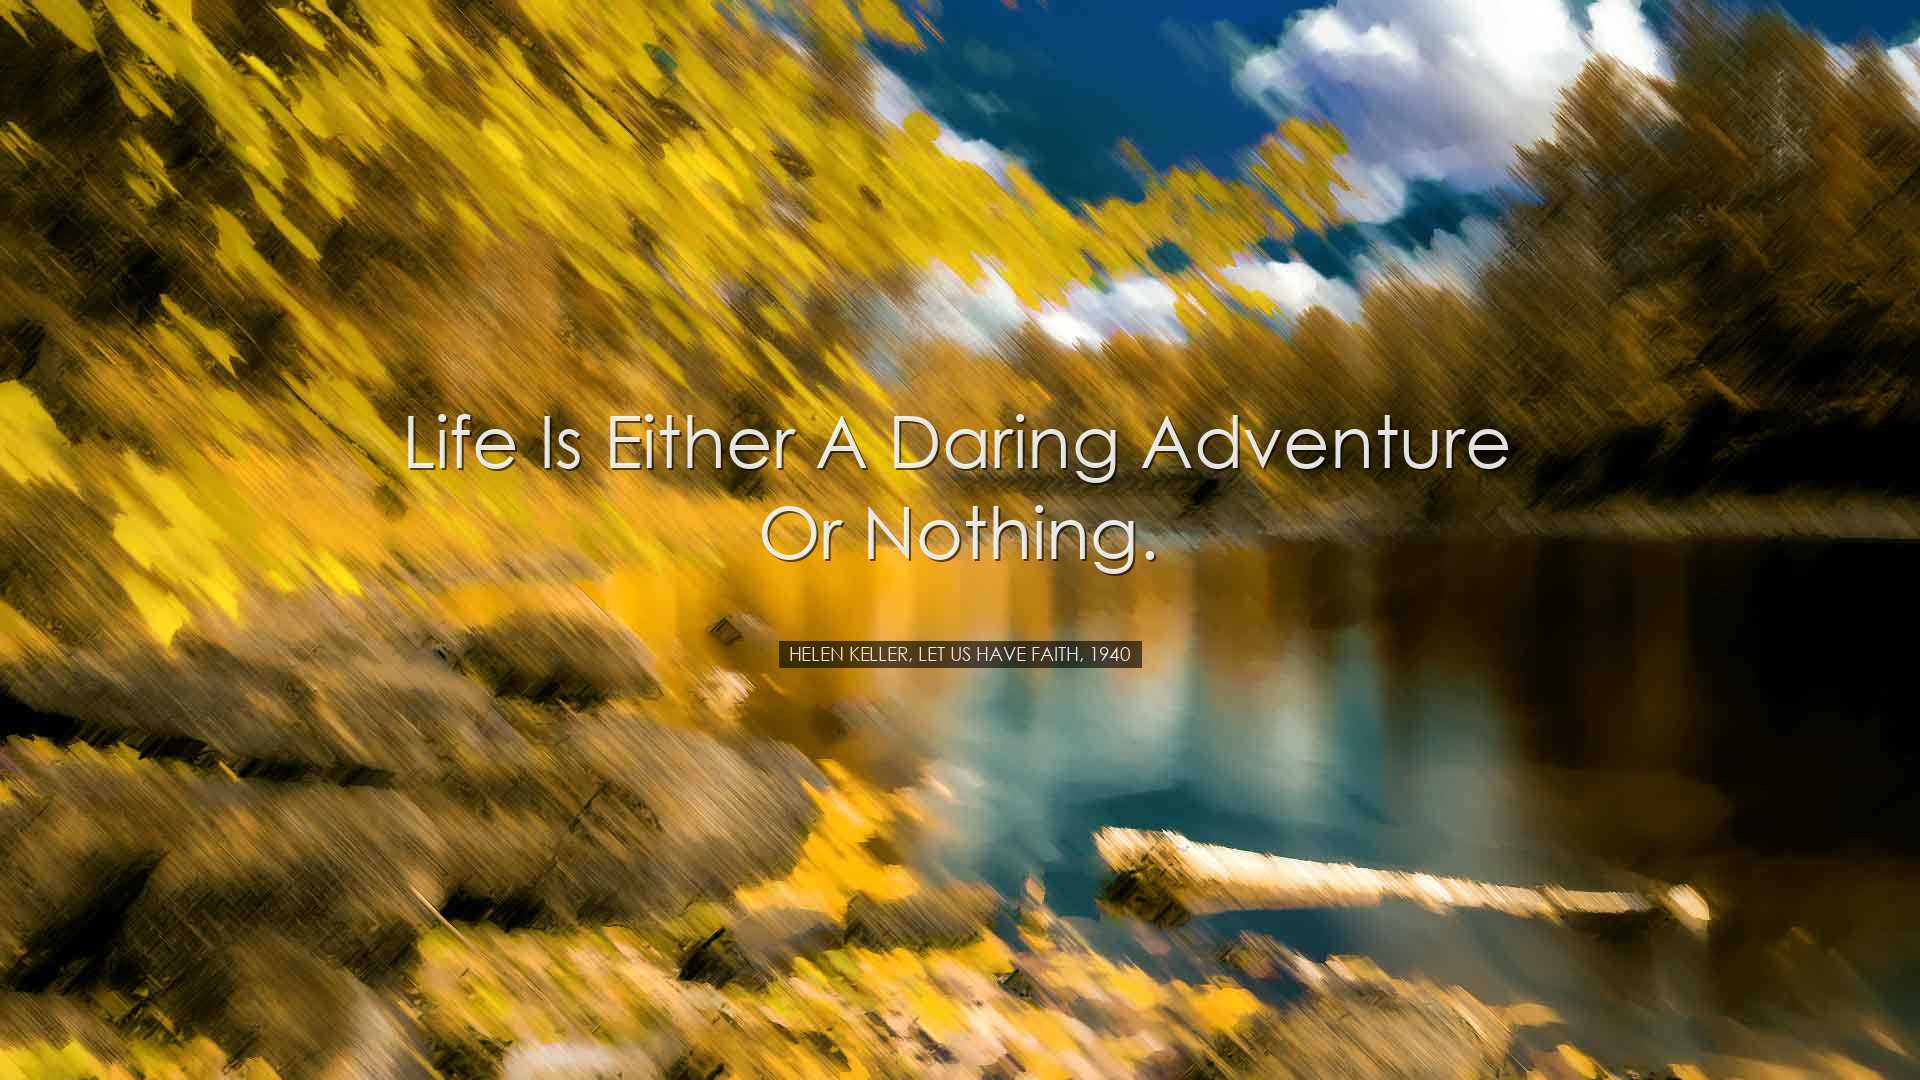 Life is either a daring adventure or nothing. - Helen Keller, Let